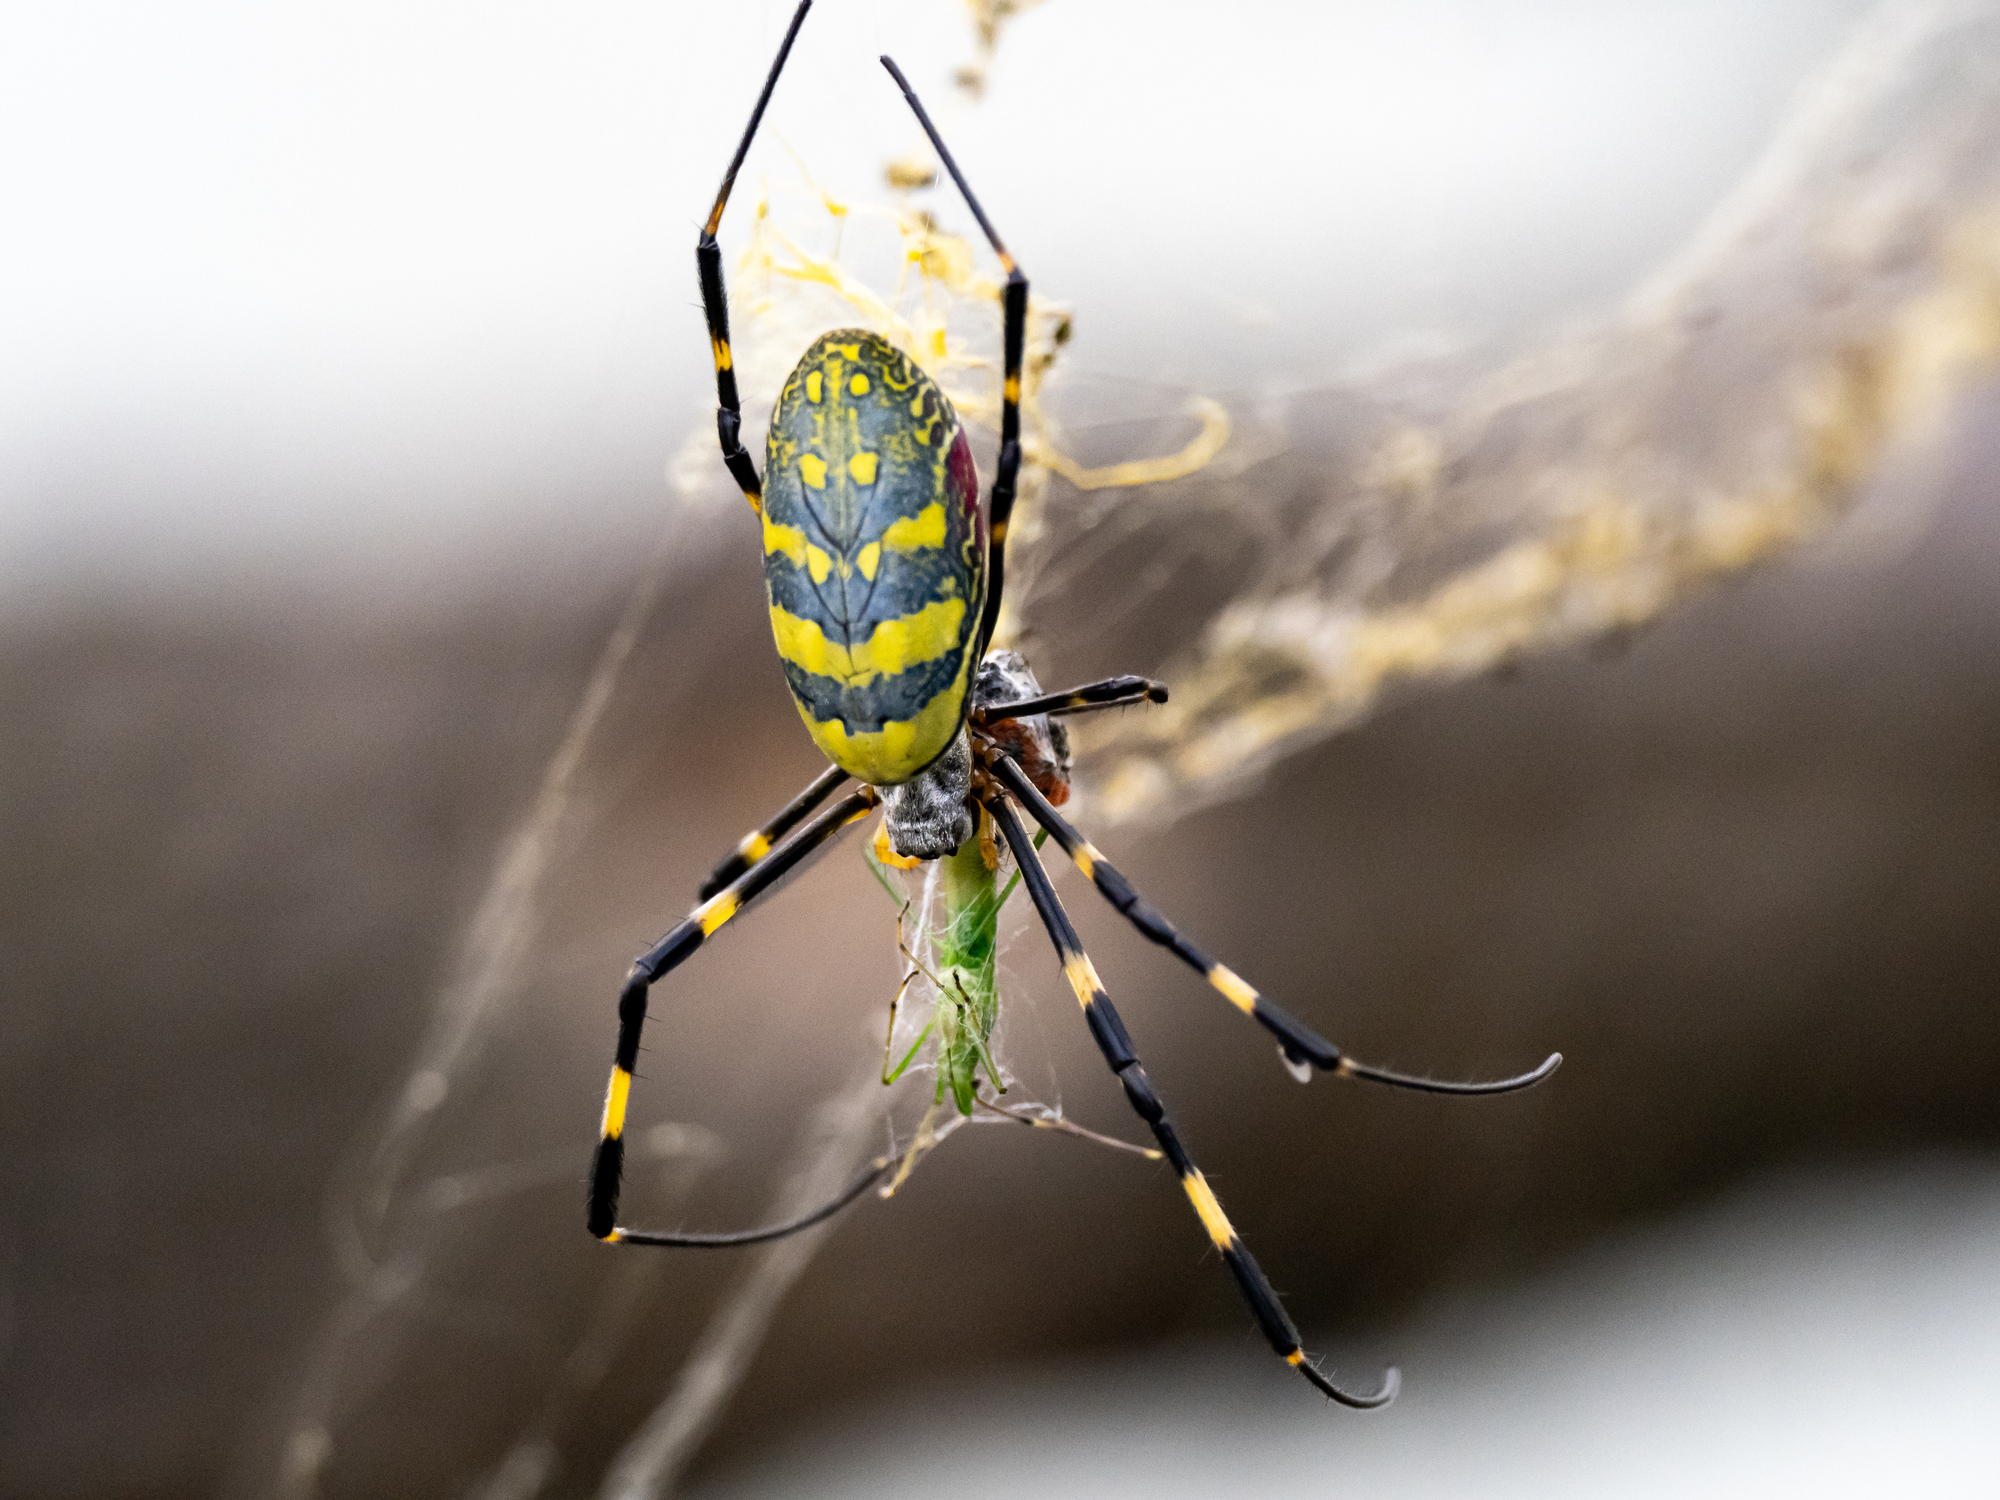 What You Need to Know About House Spiders